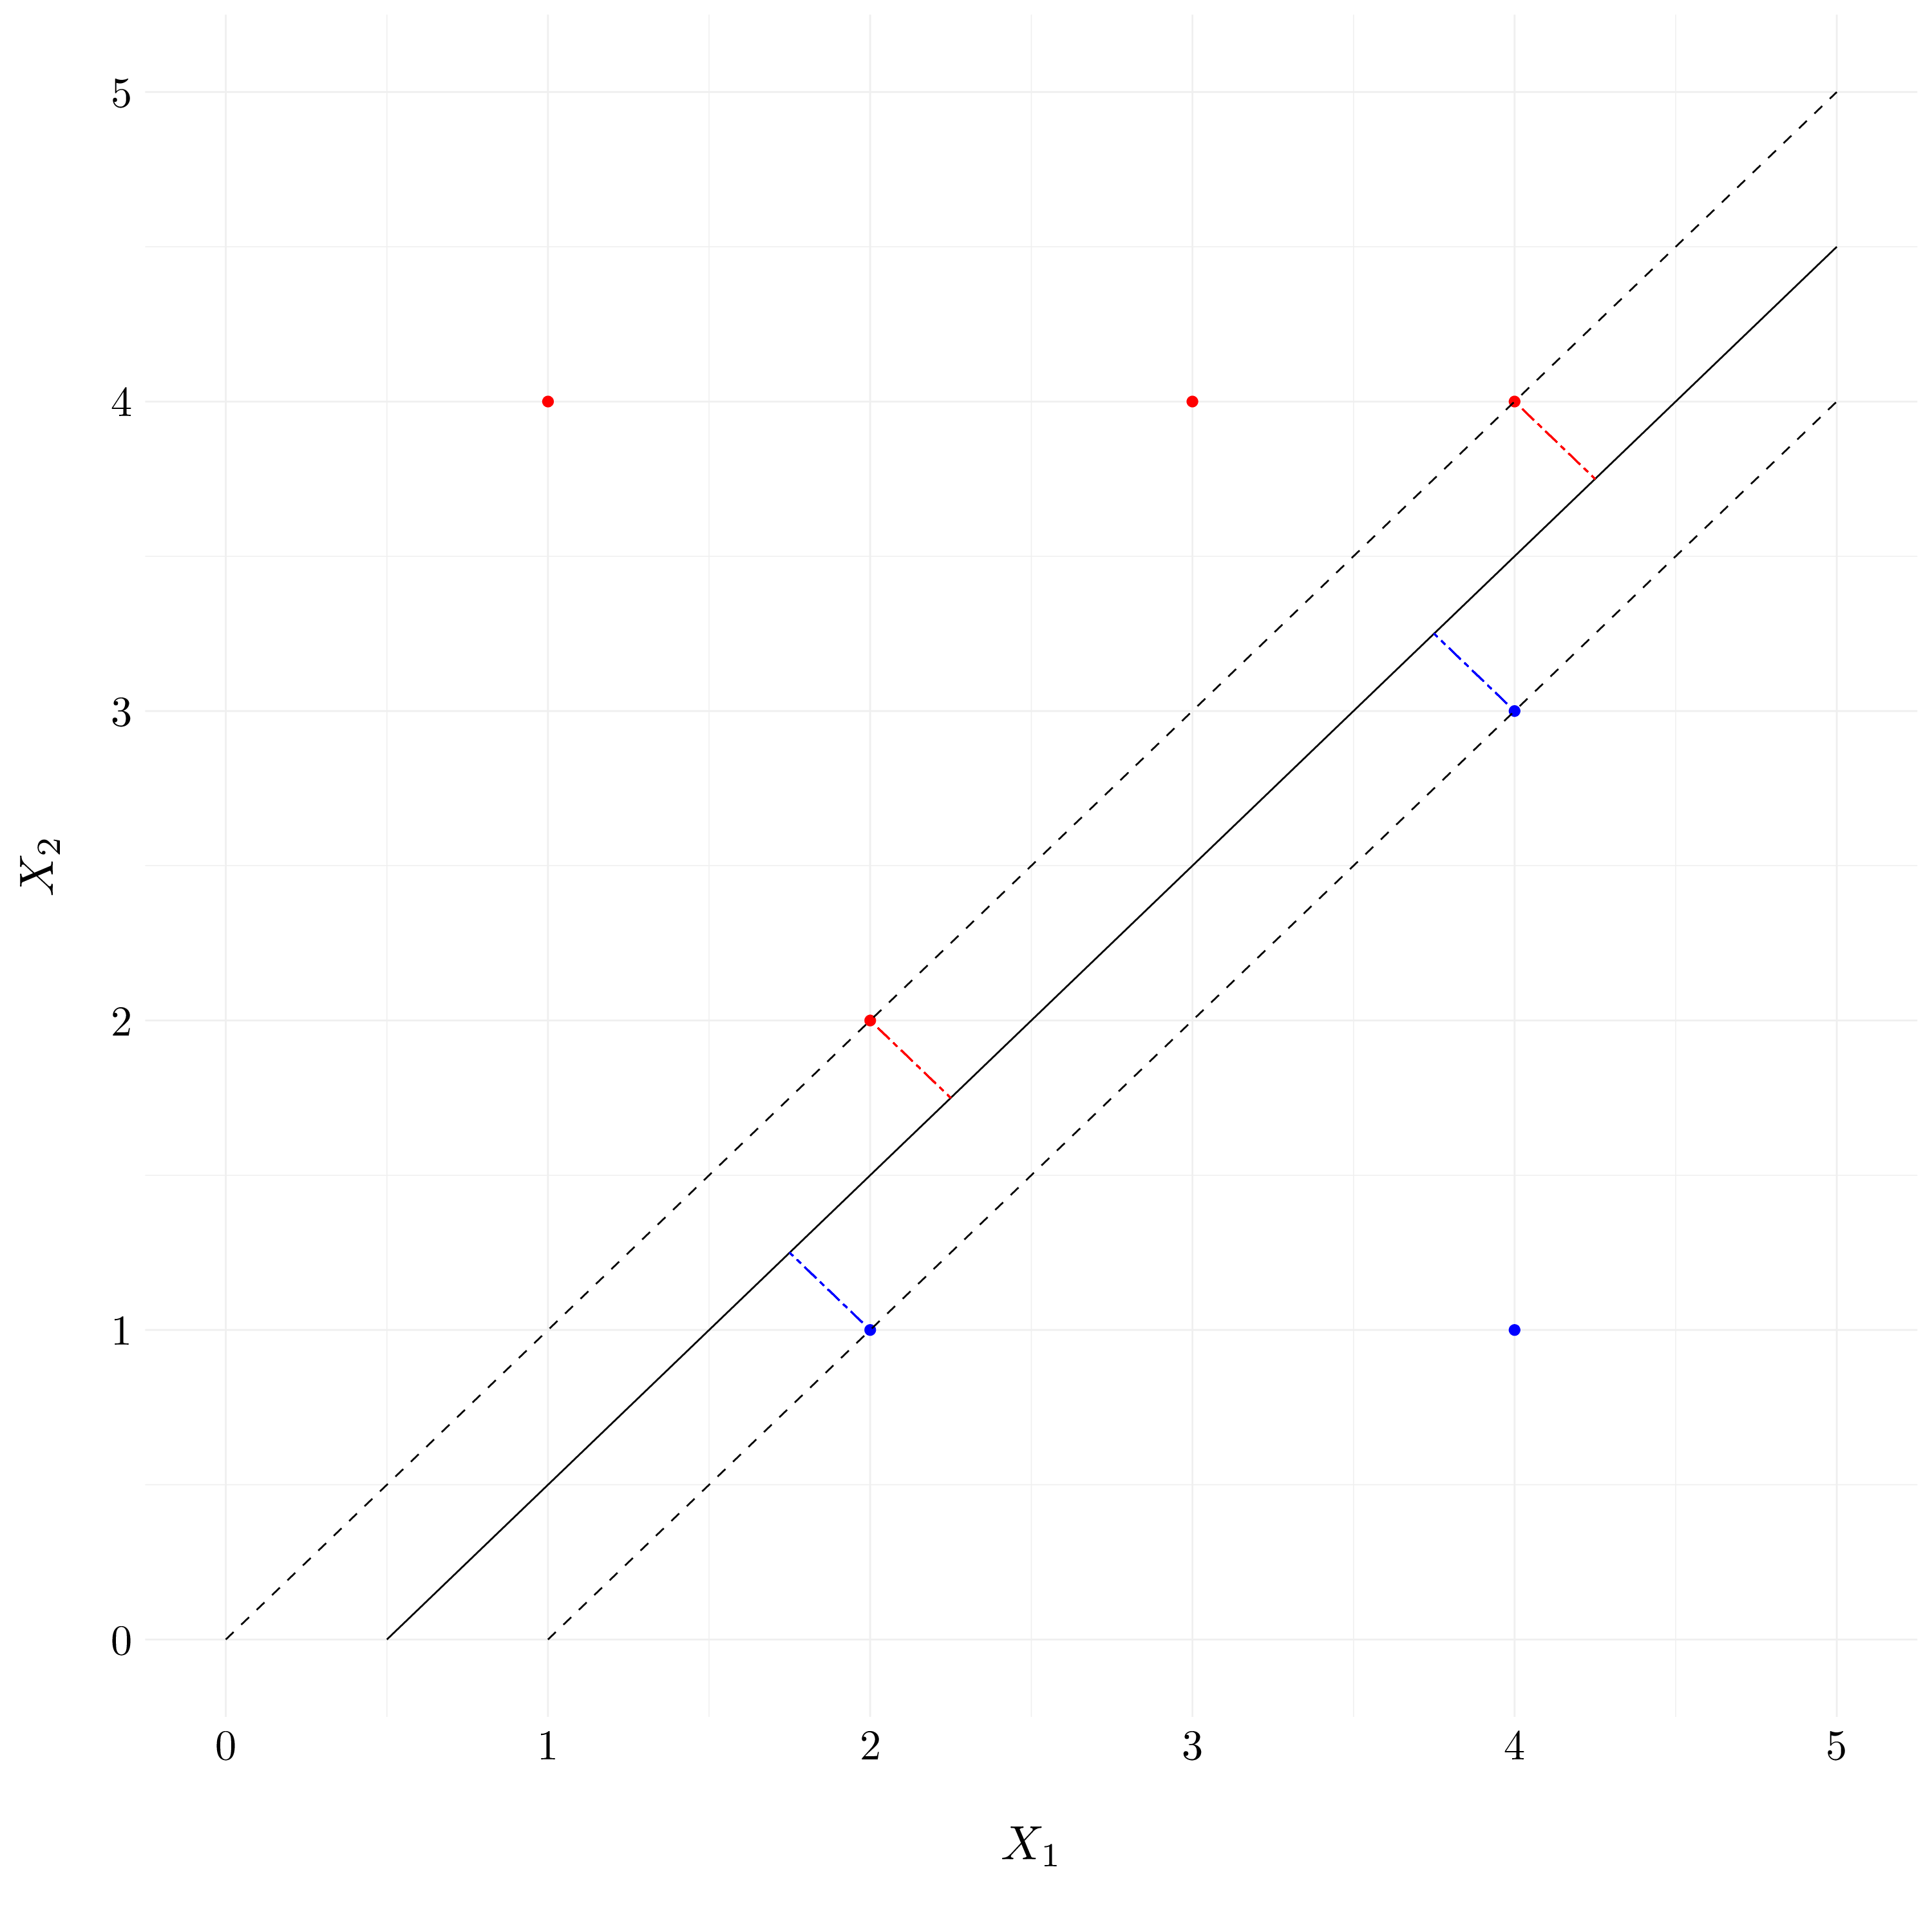 Example of the support vectors